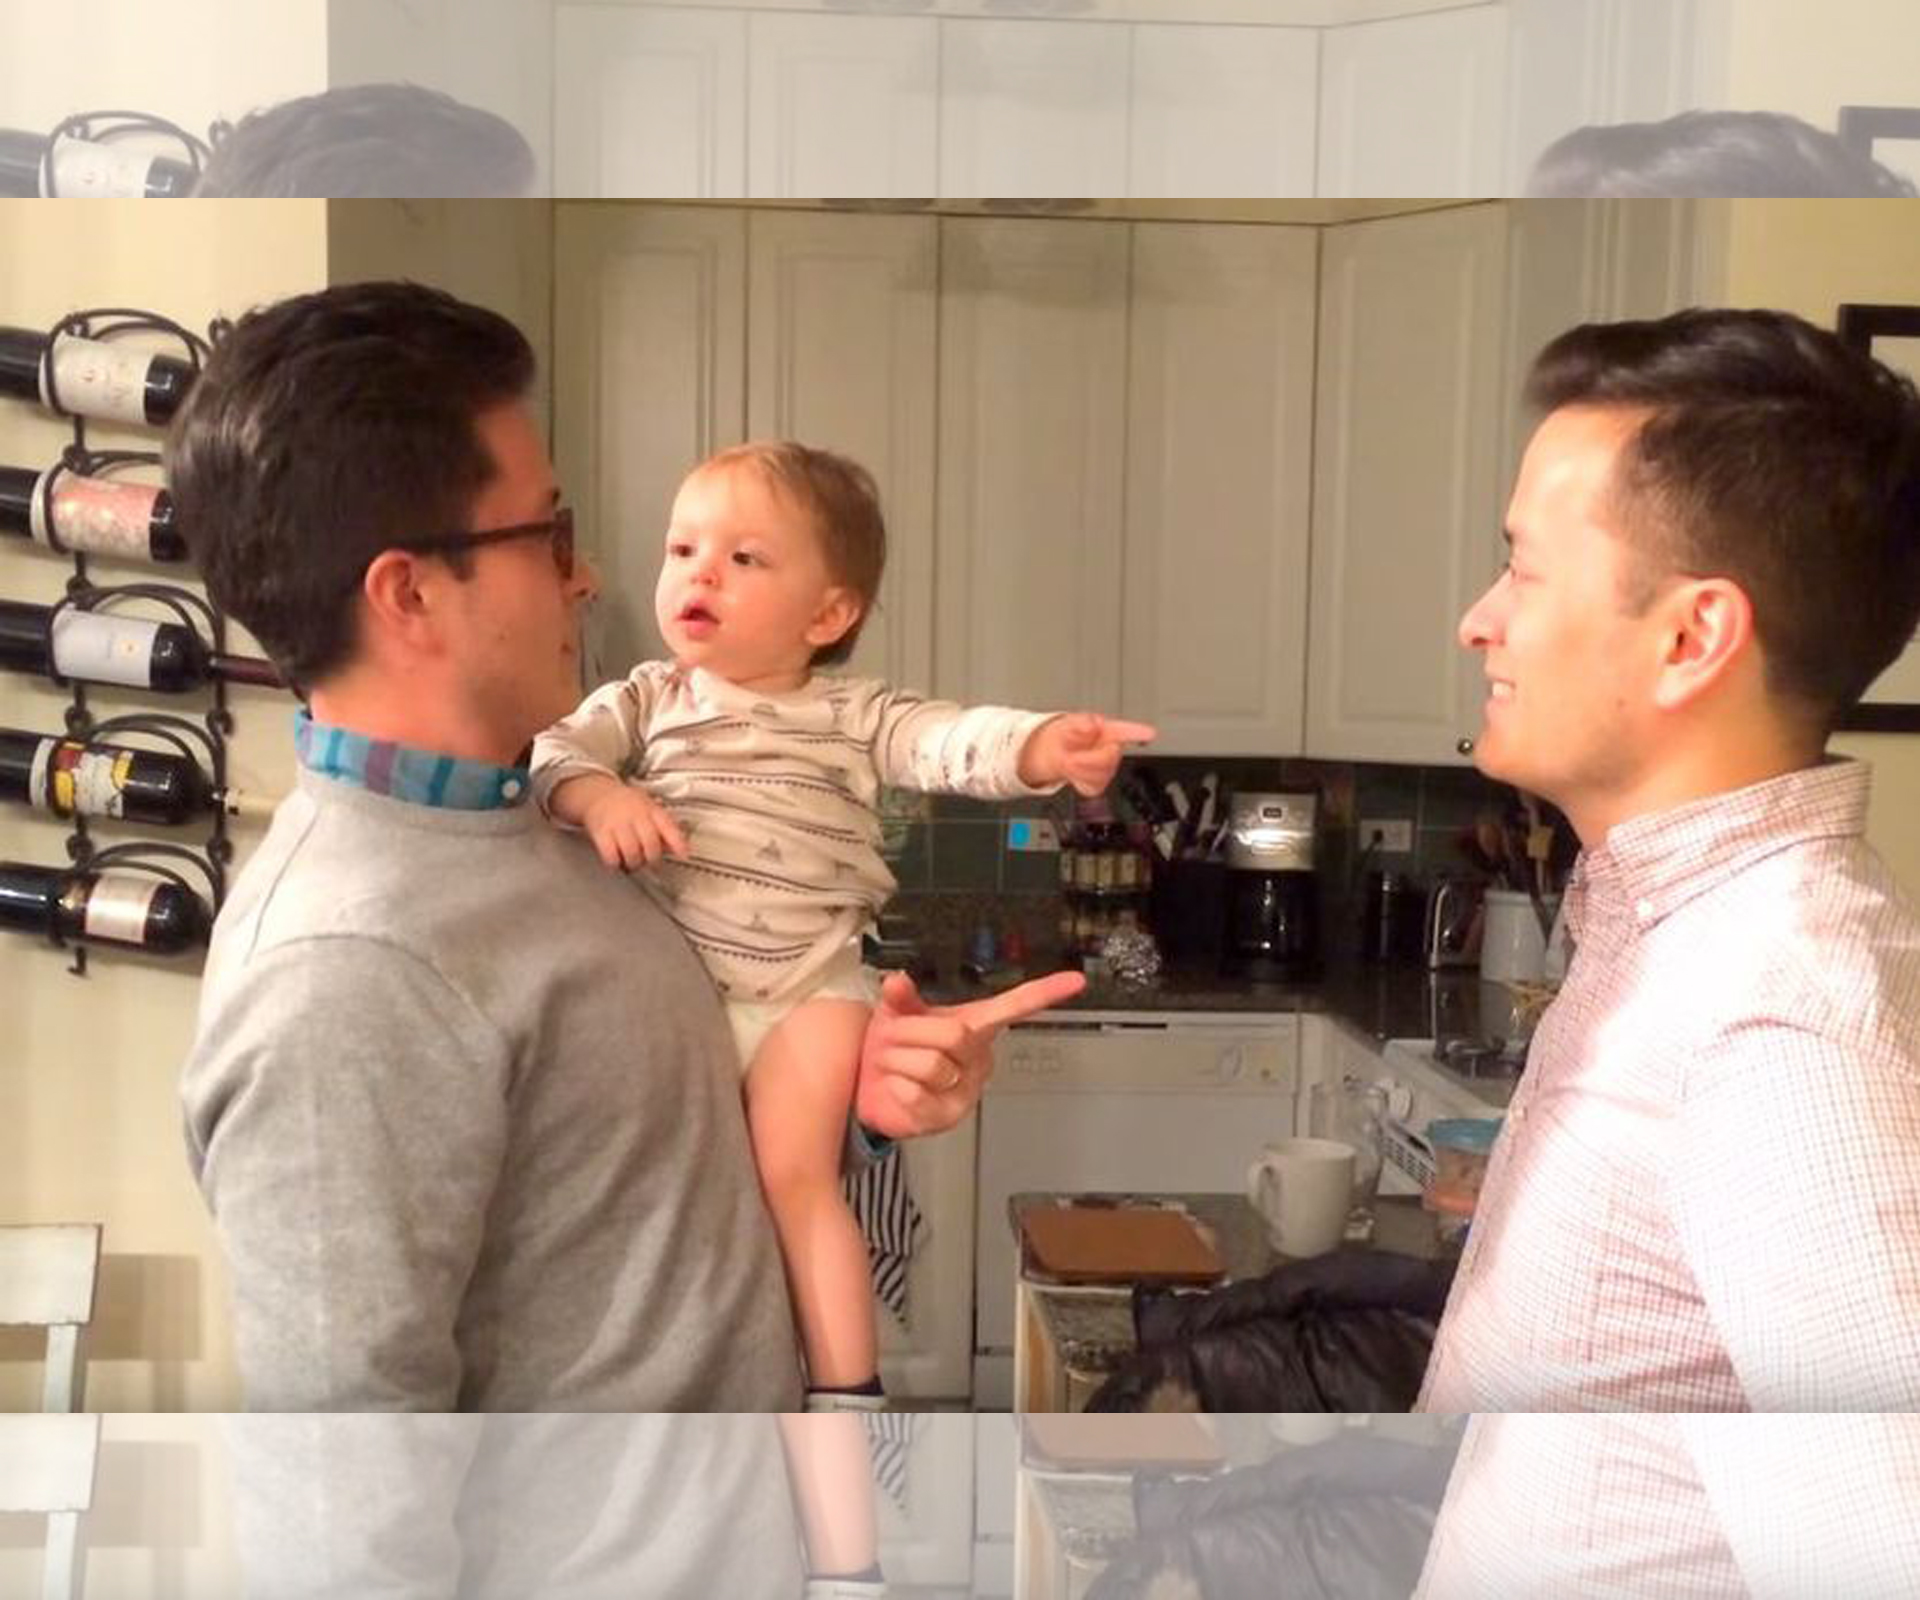 Adorable baby gets confused by twin dad